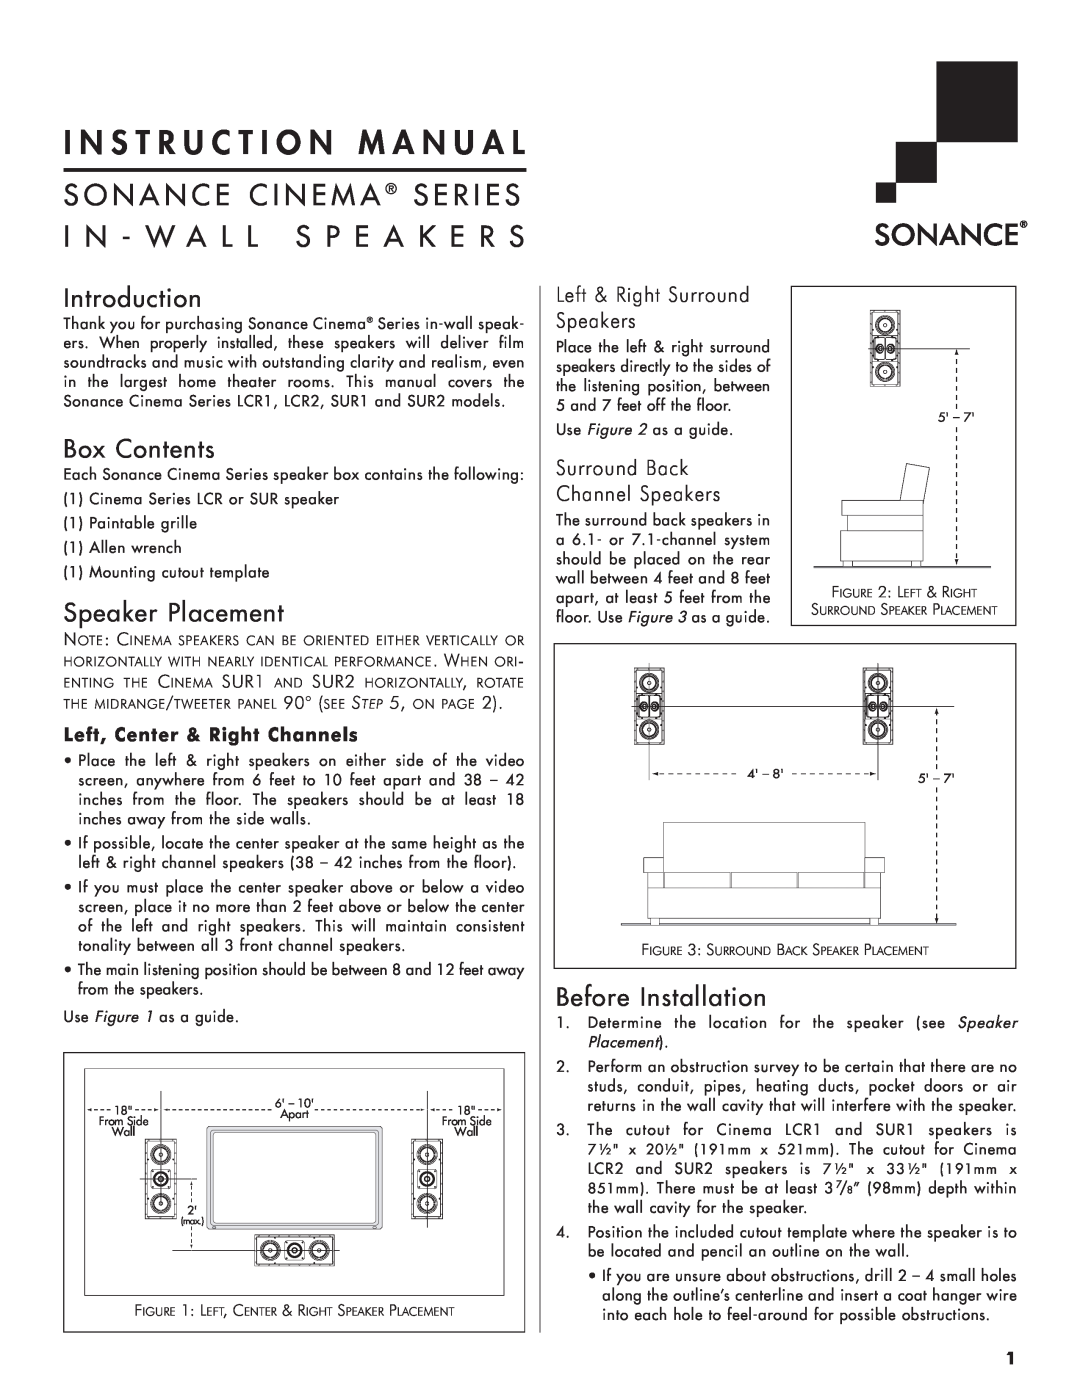 Sonance 91652 instruction manual Introduction, Box Contents, Speaker Placement, Before Installation 